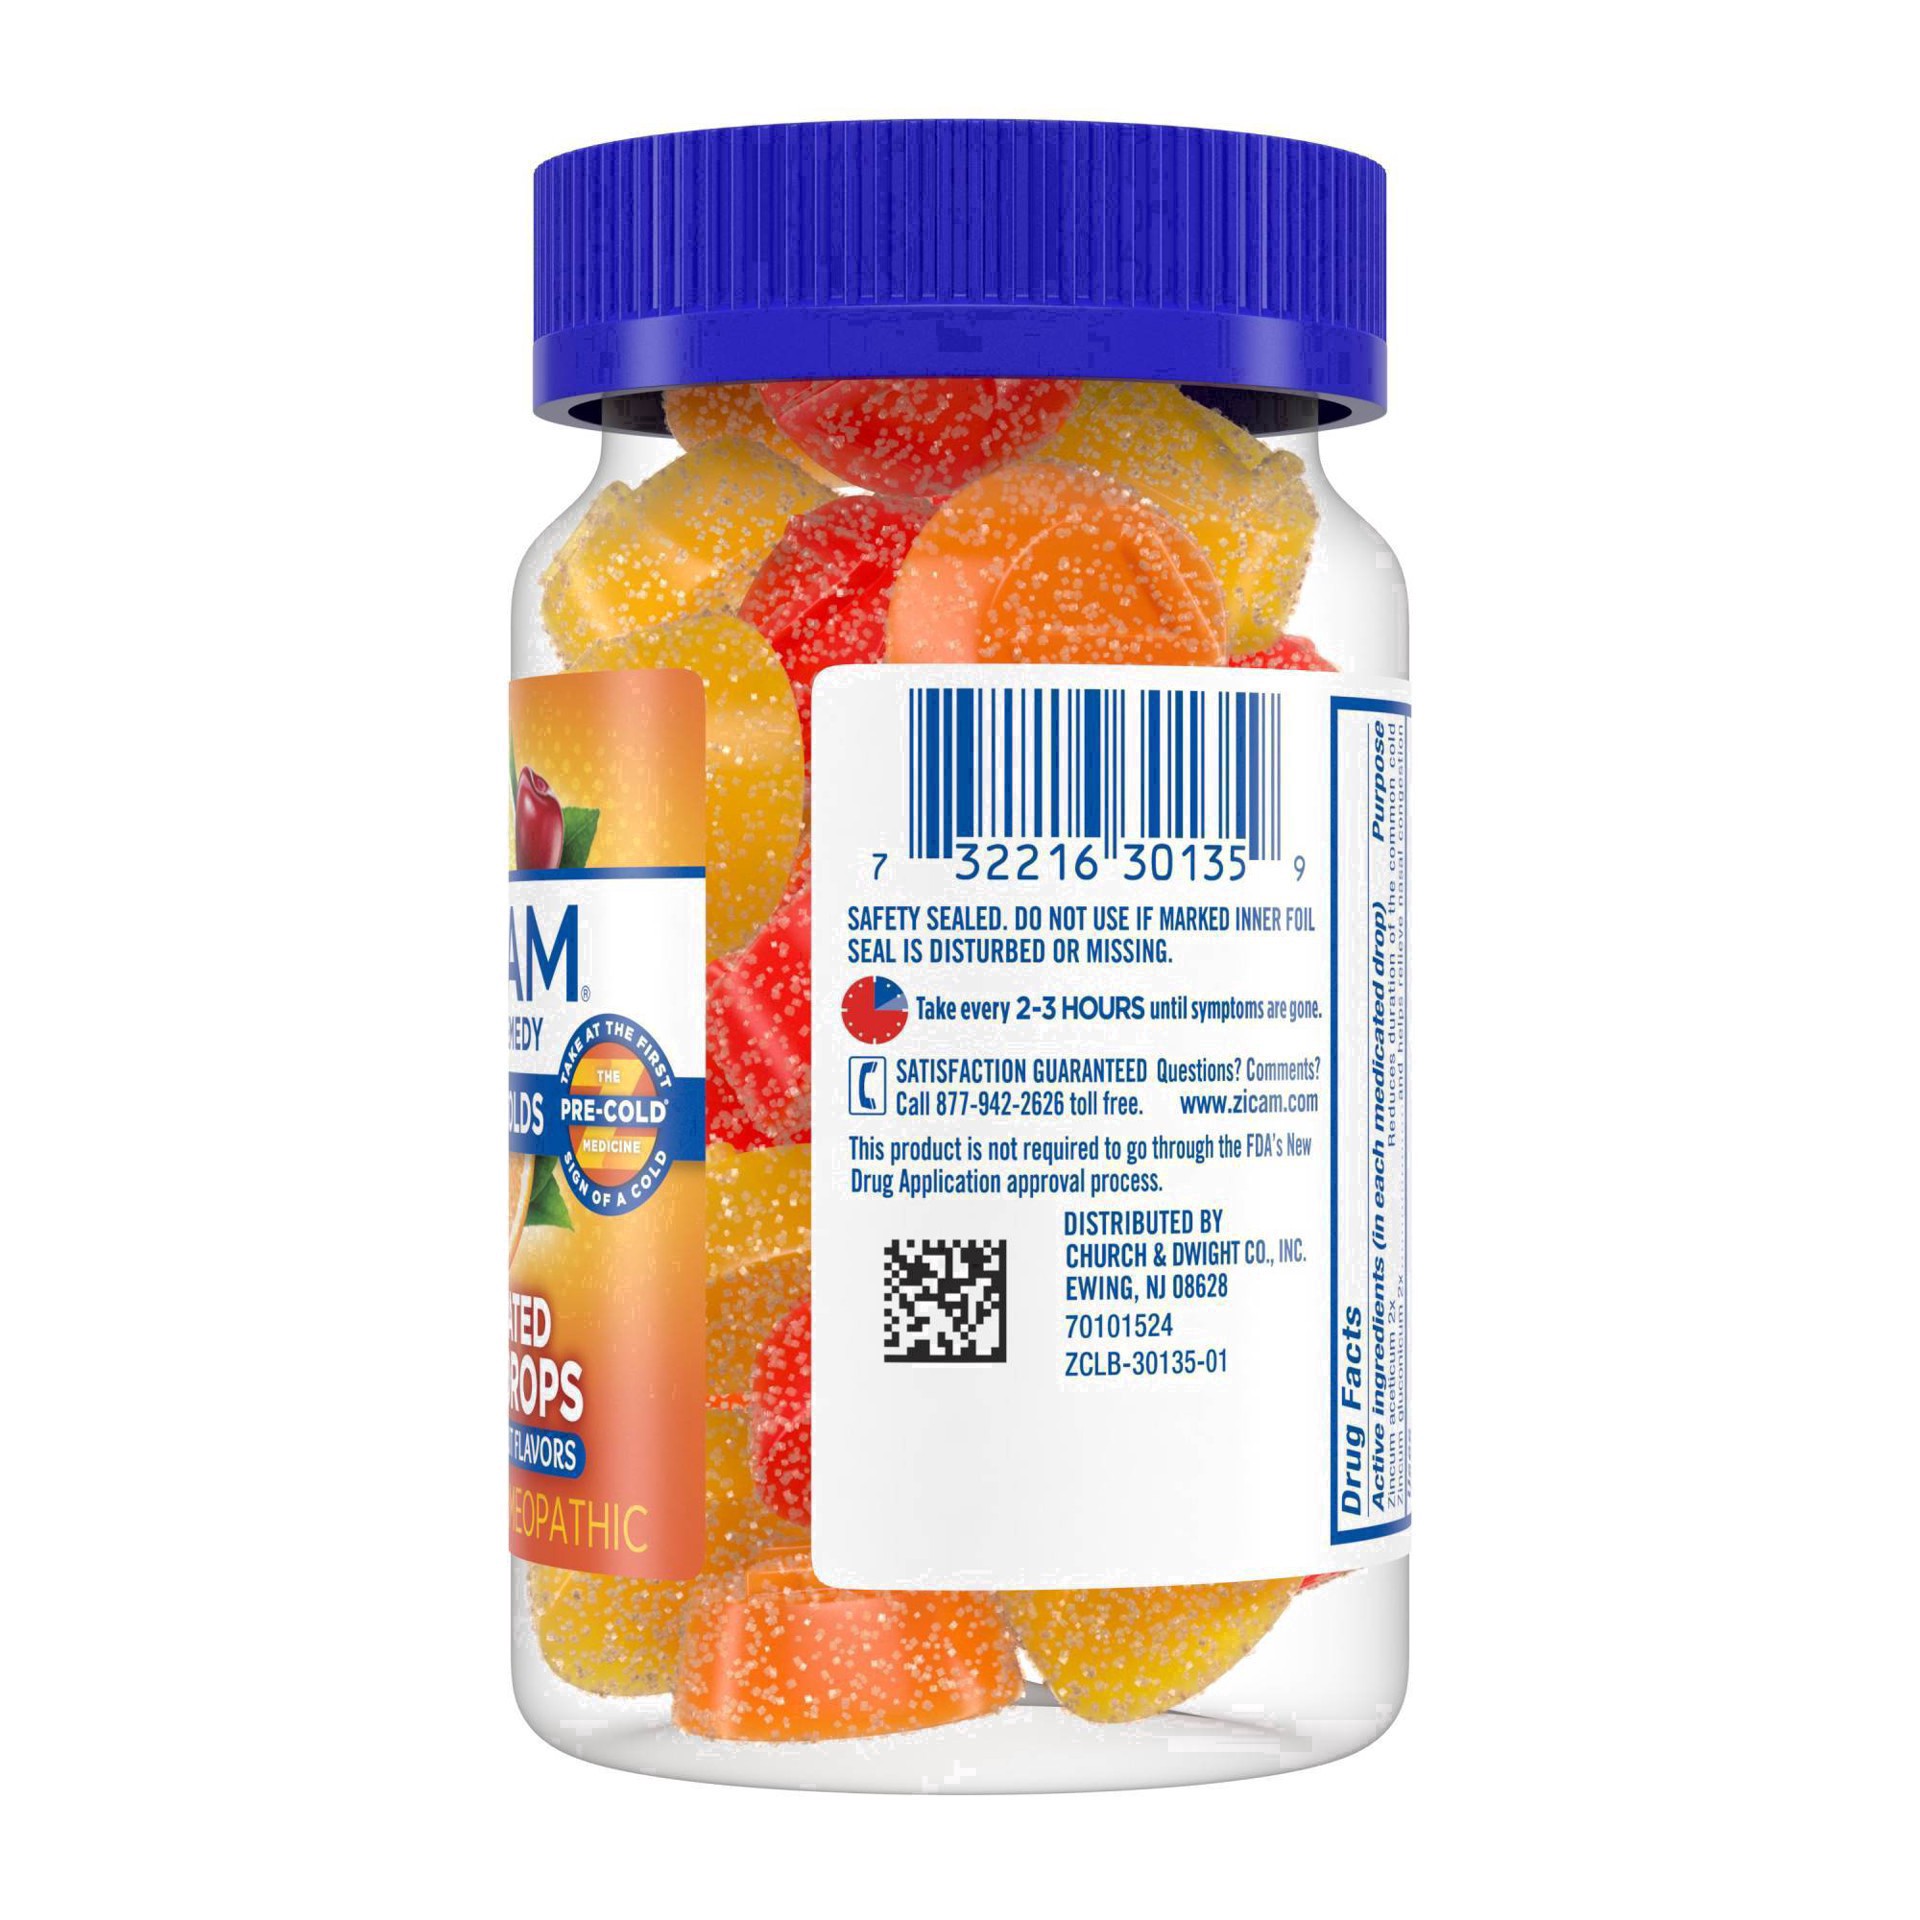 slide 20 of 58, Zicam Cold Remedy Medicated Drops - Fruit - 25ct, 25 ct